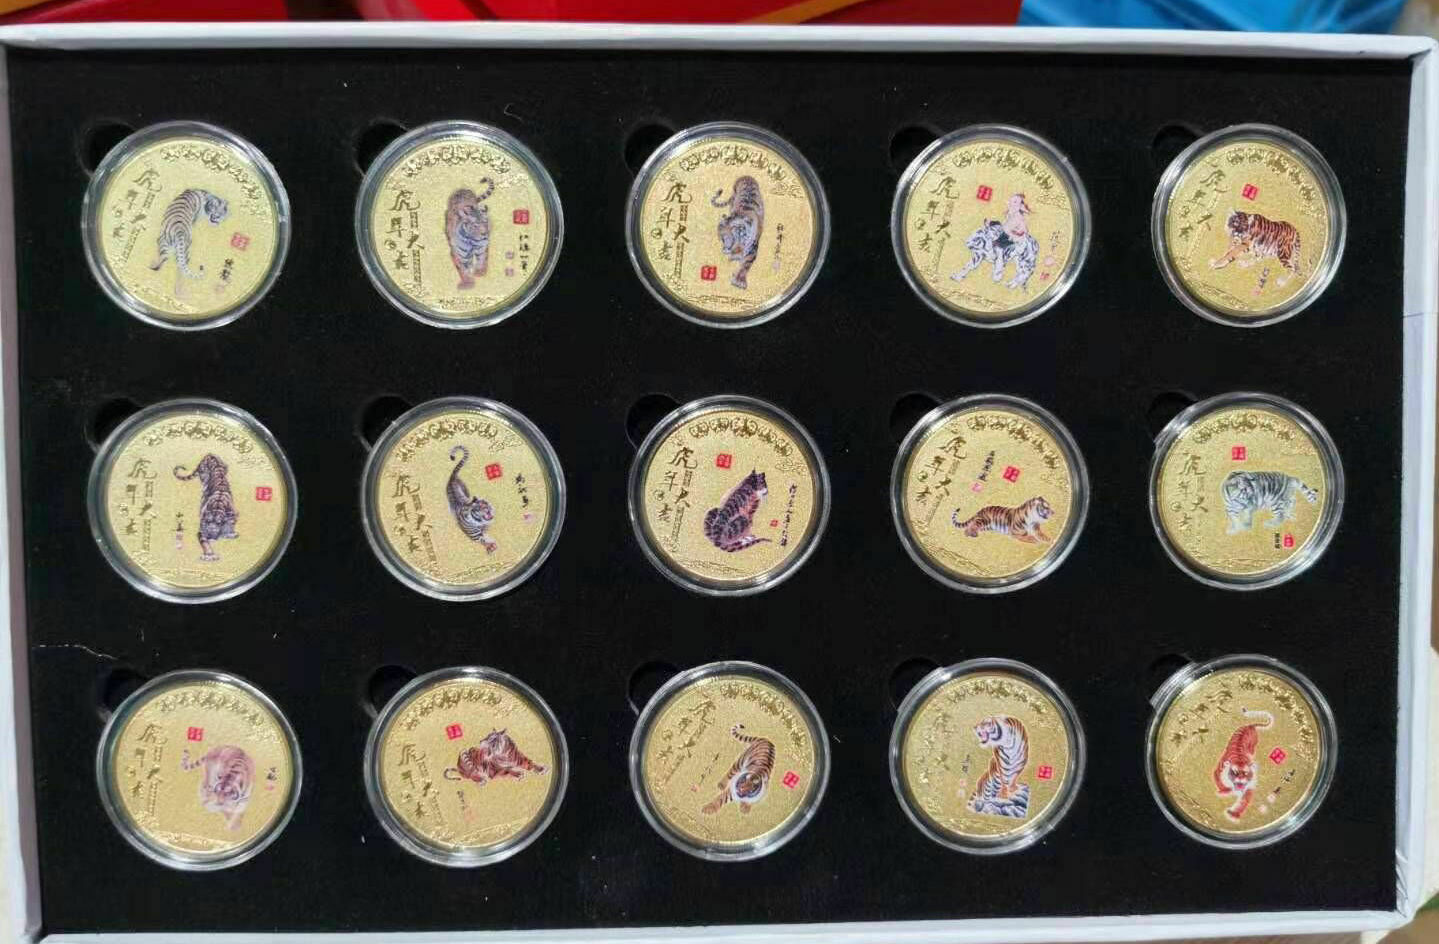 15 Pcs New 2022 Chinese Zodiac Gold Colour Coins - Year Of The Tiger